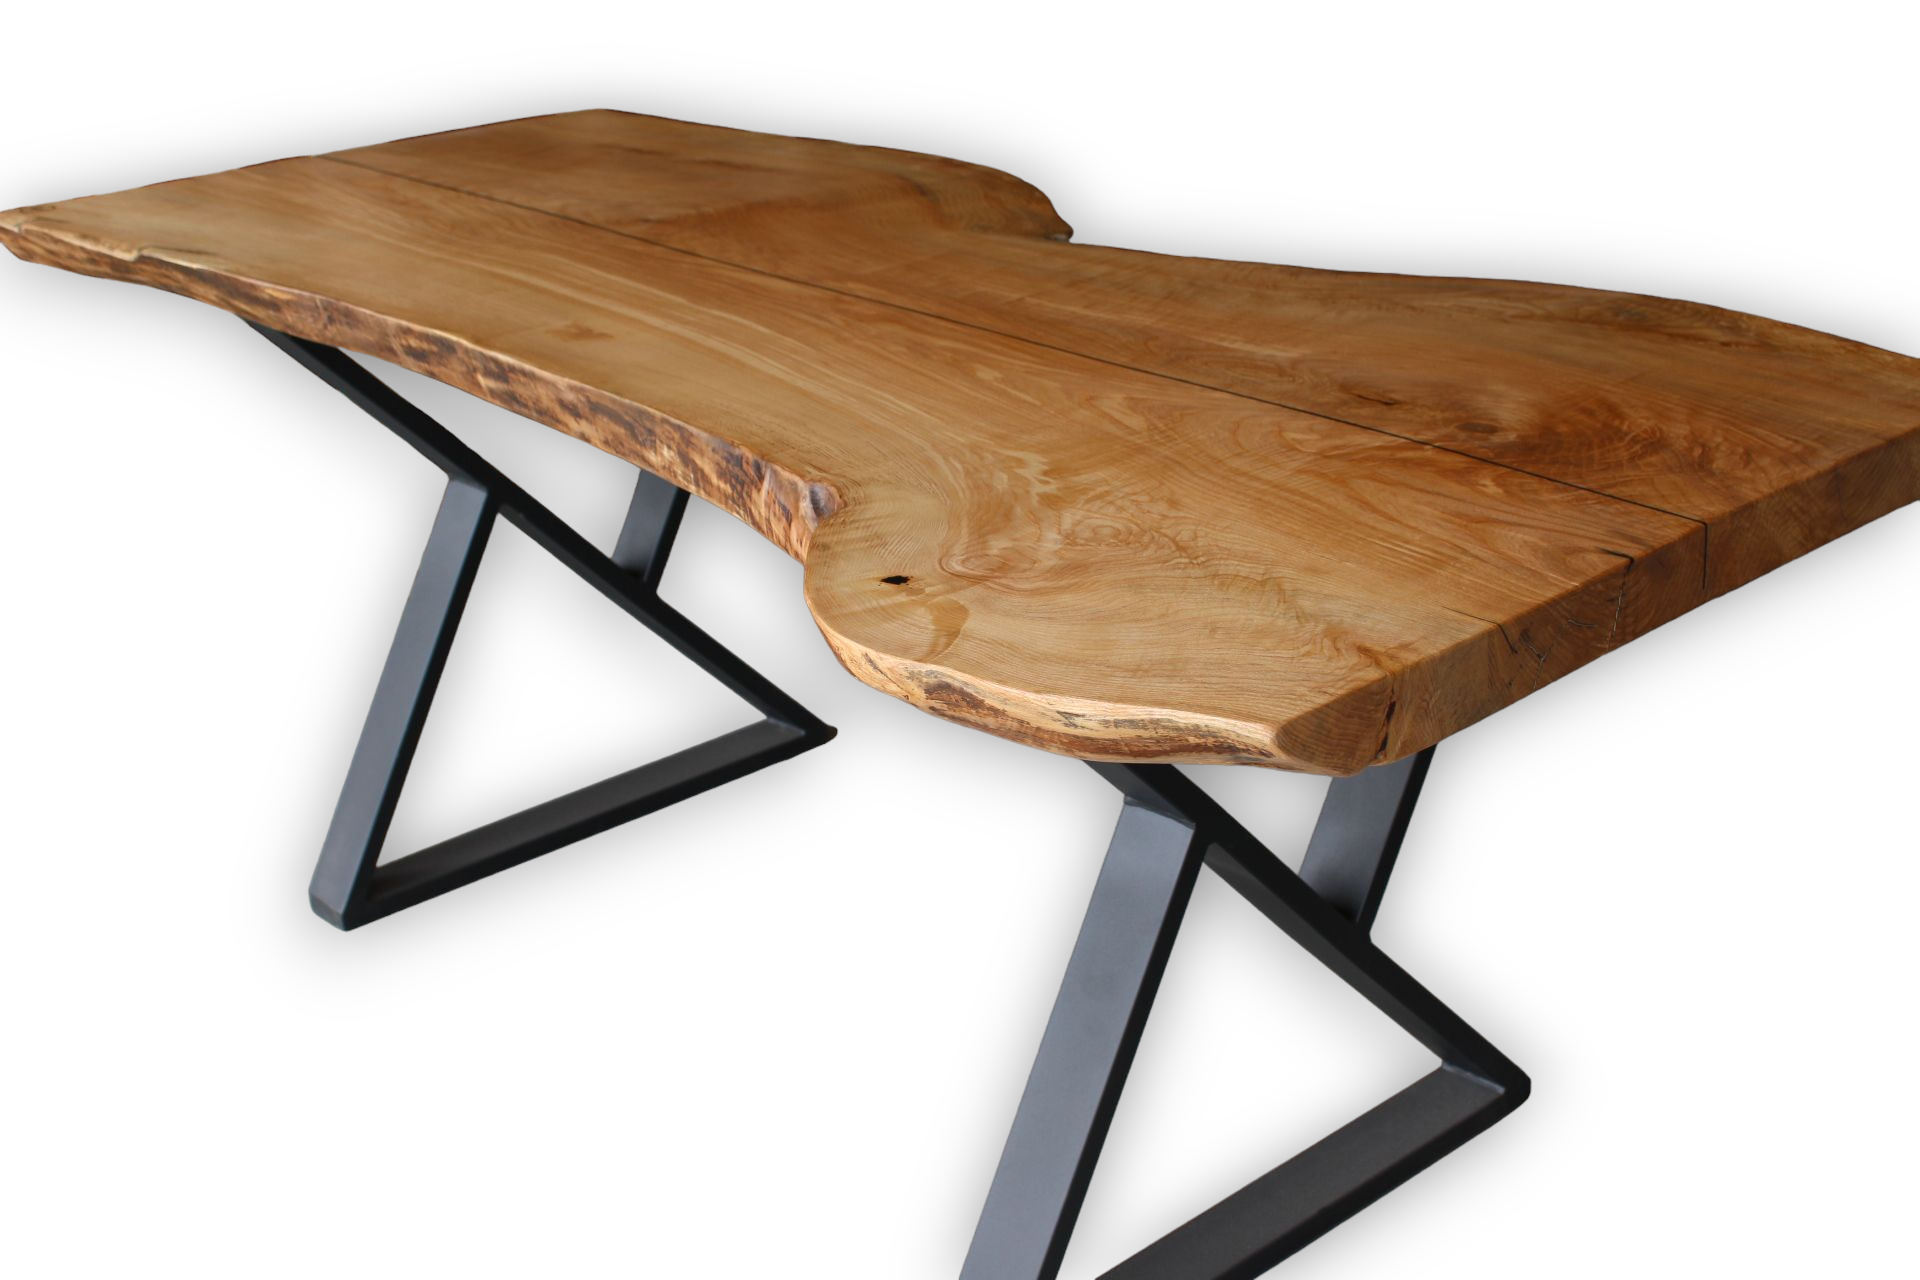 6.5 Feet Live Edge Dining Tables or Desk